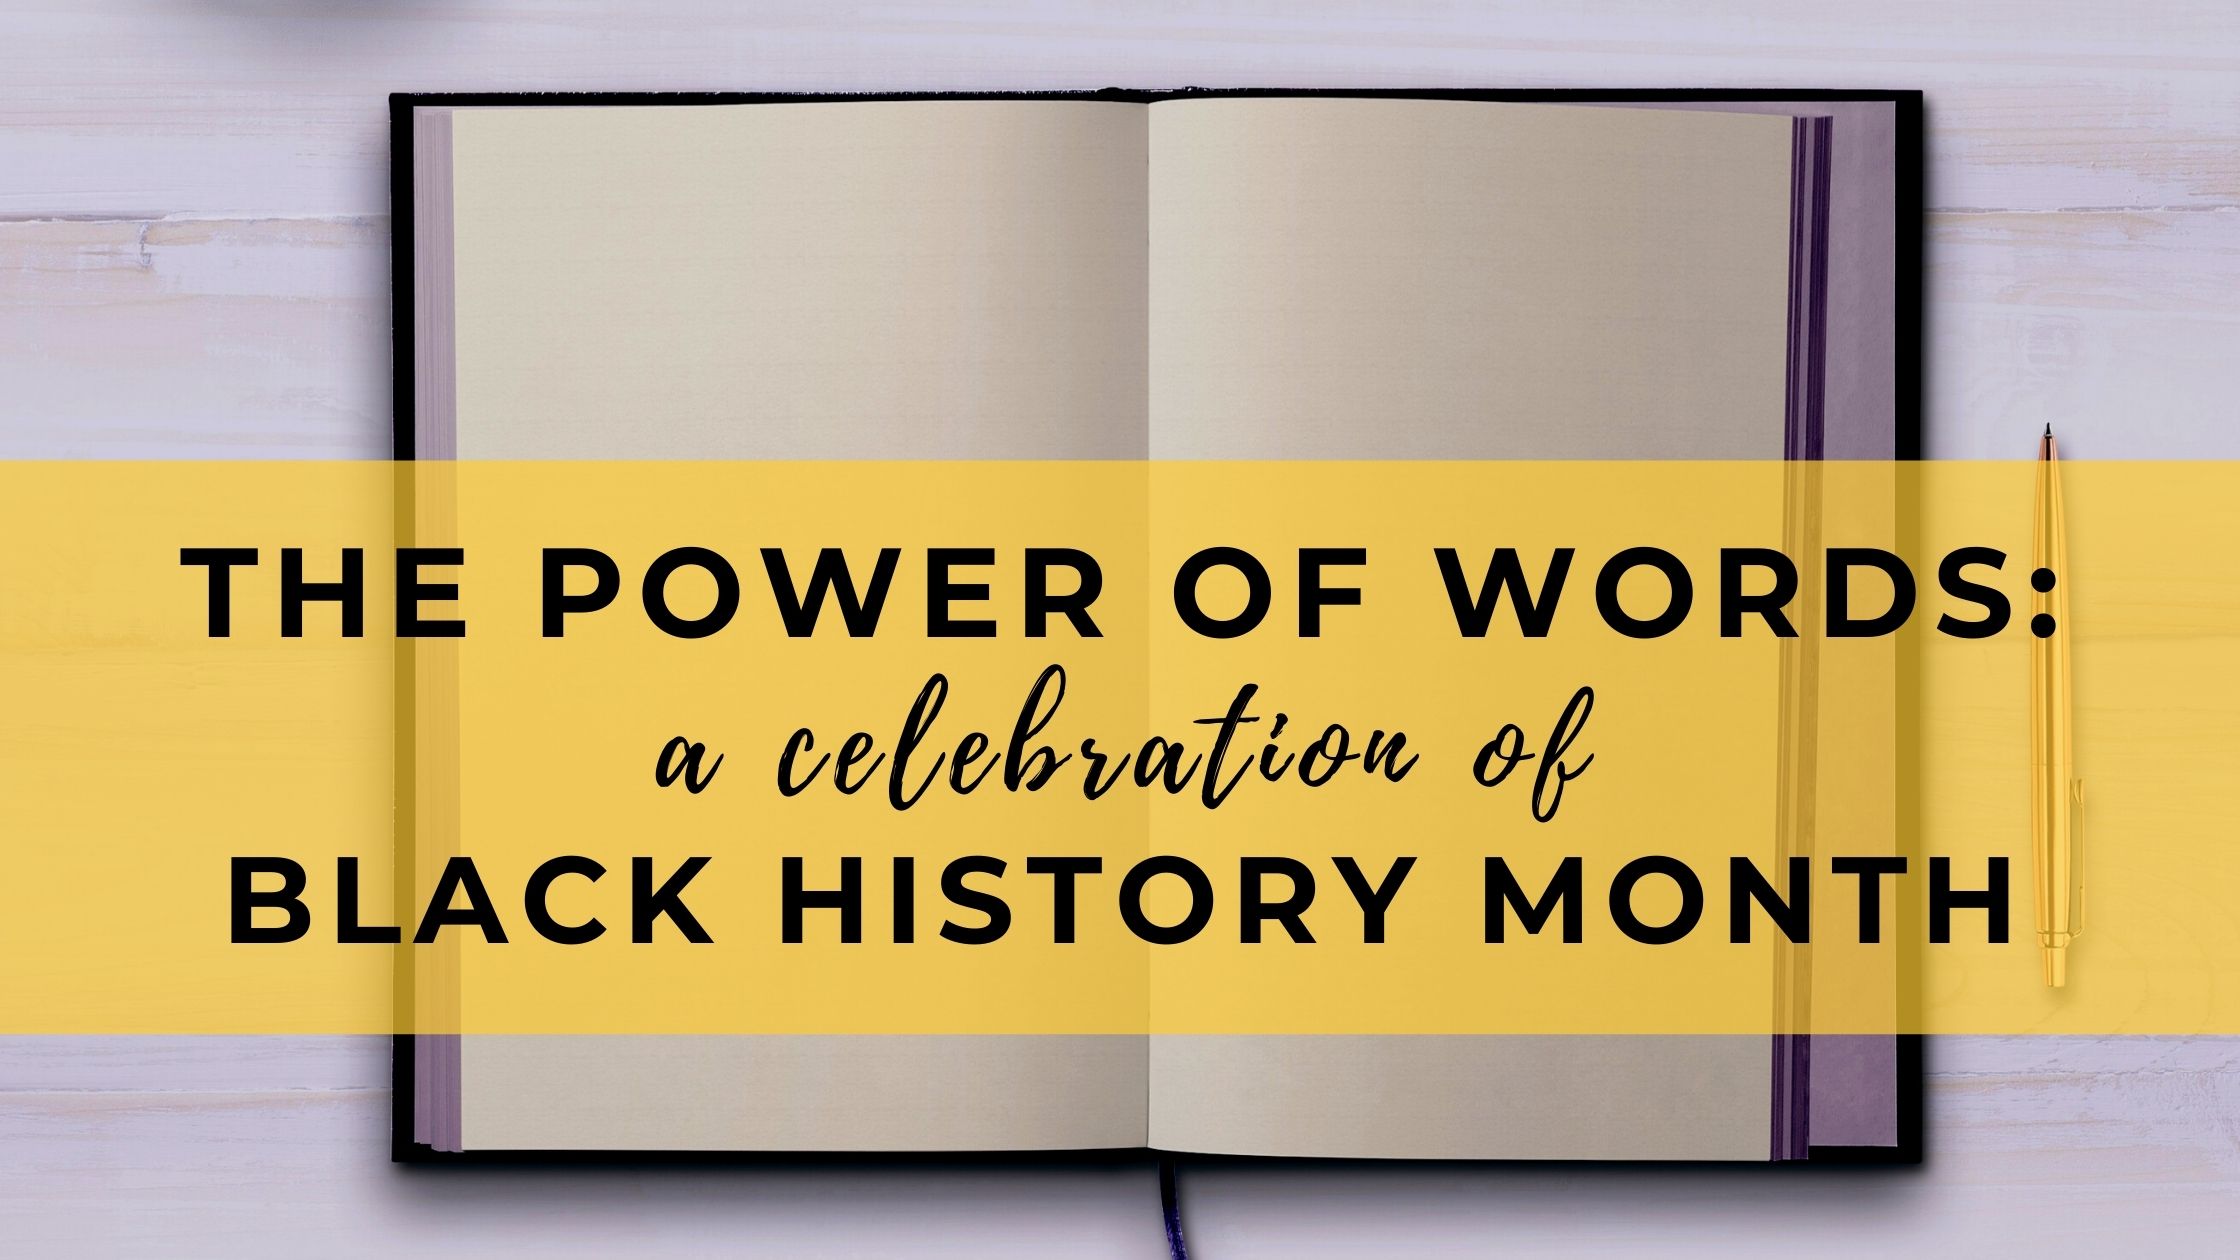 The Power of Words: A Celebration of Black History Month